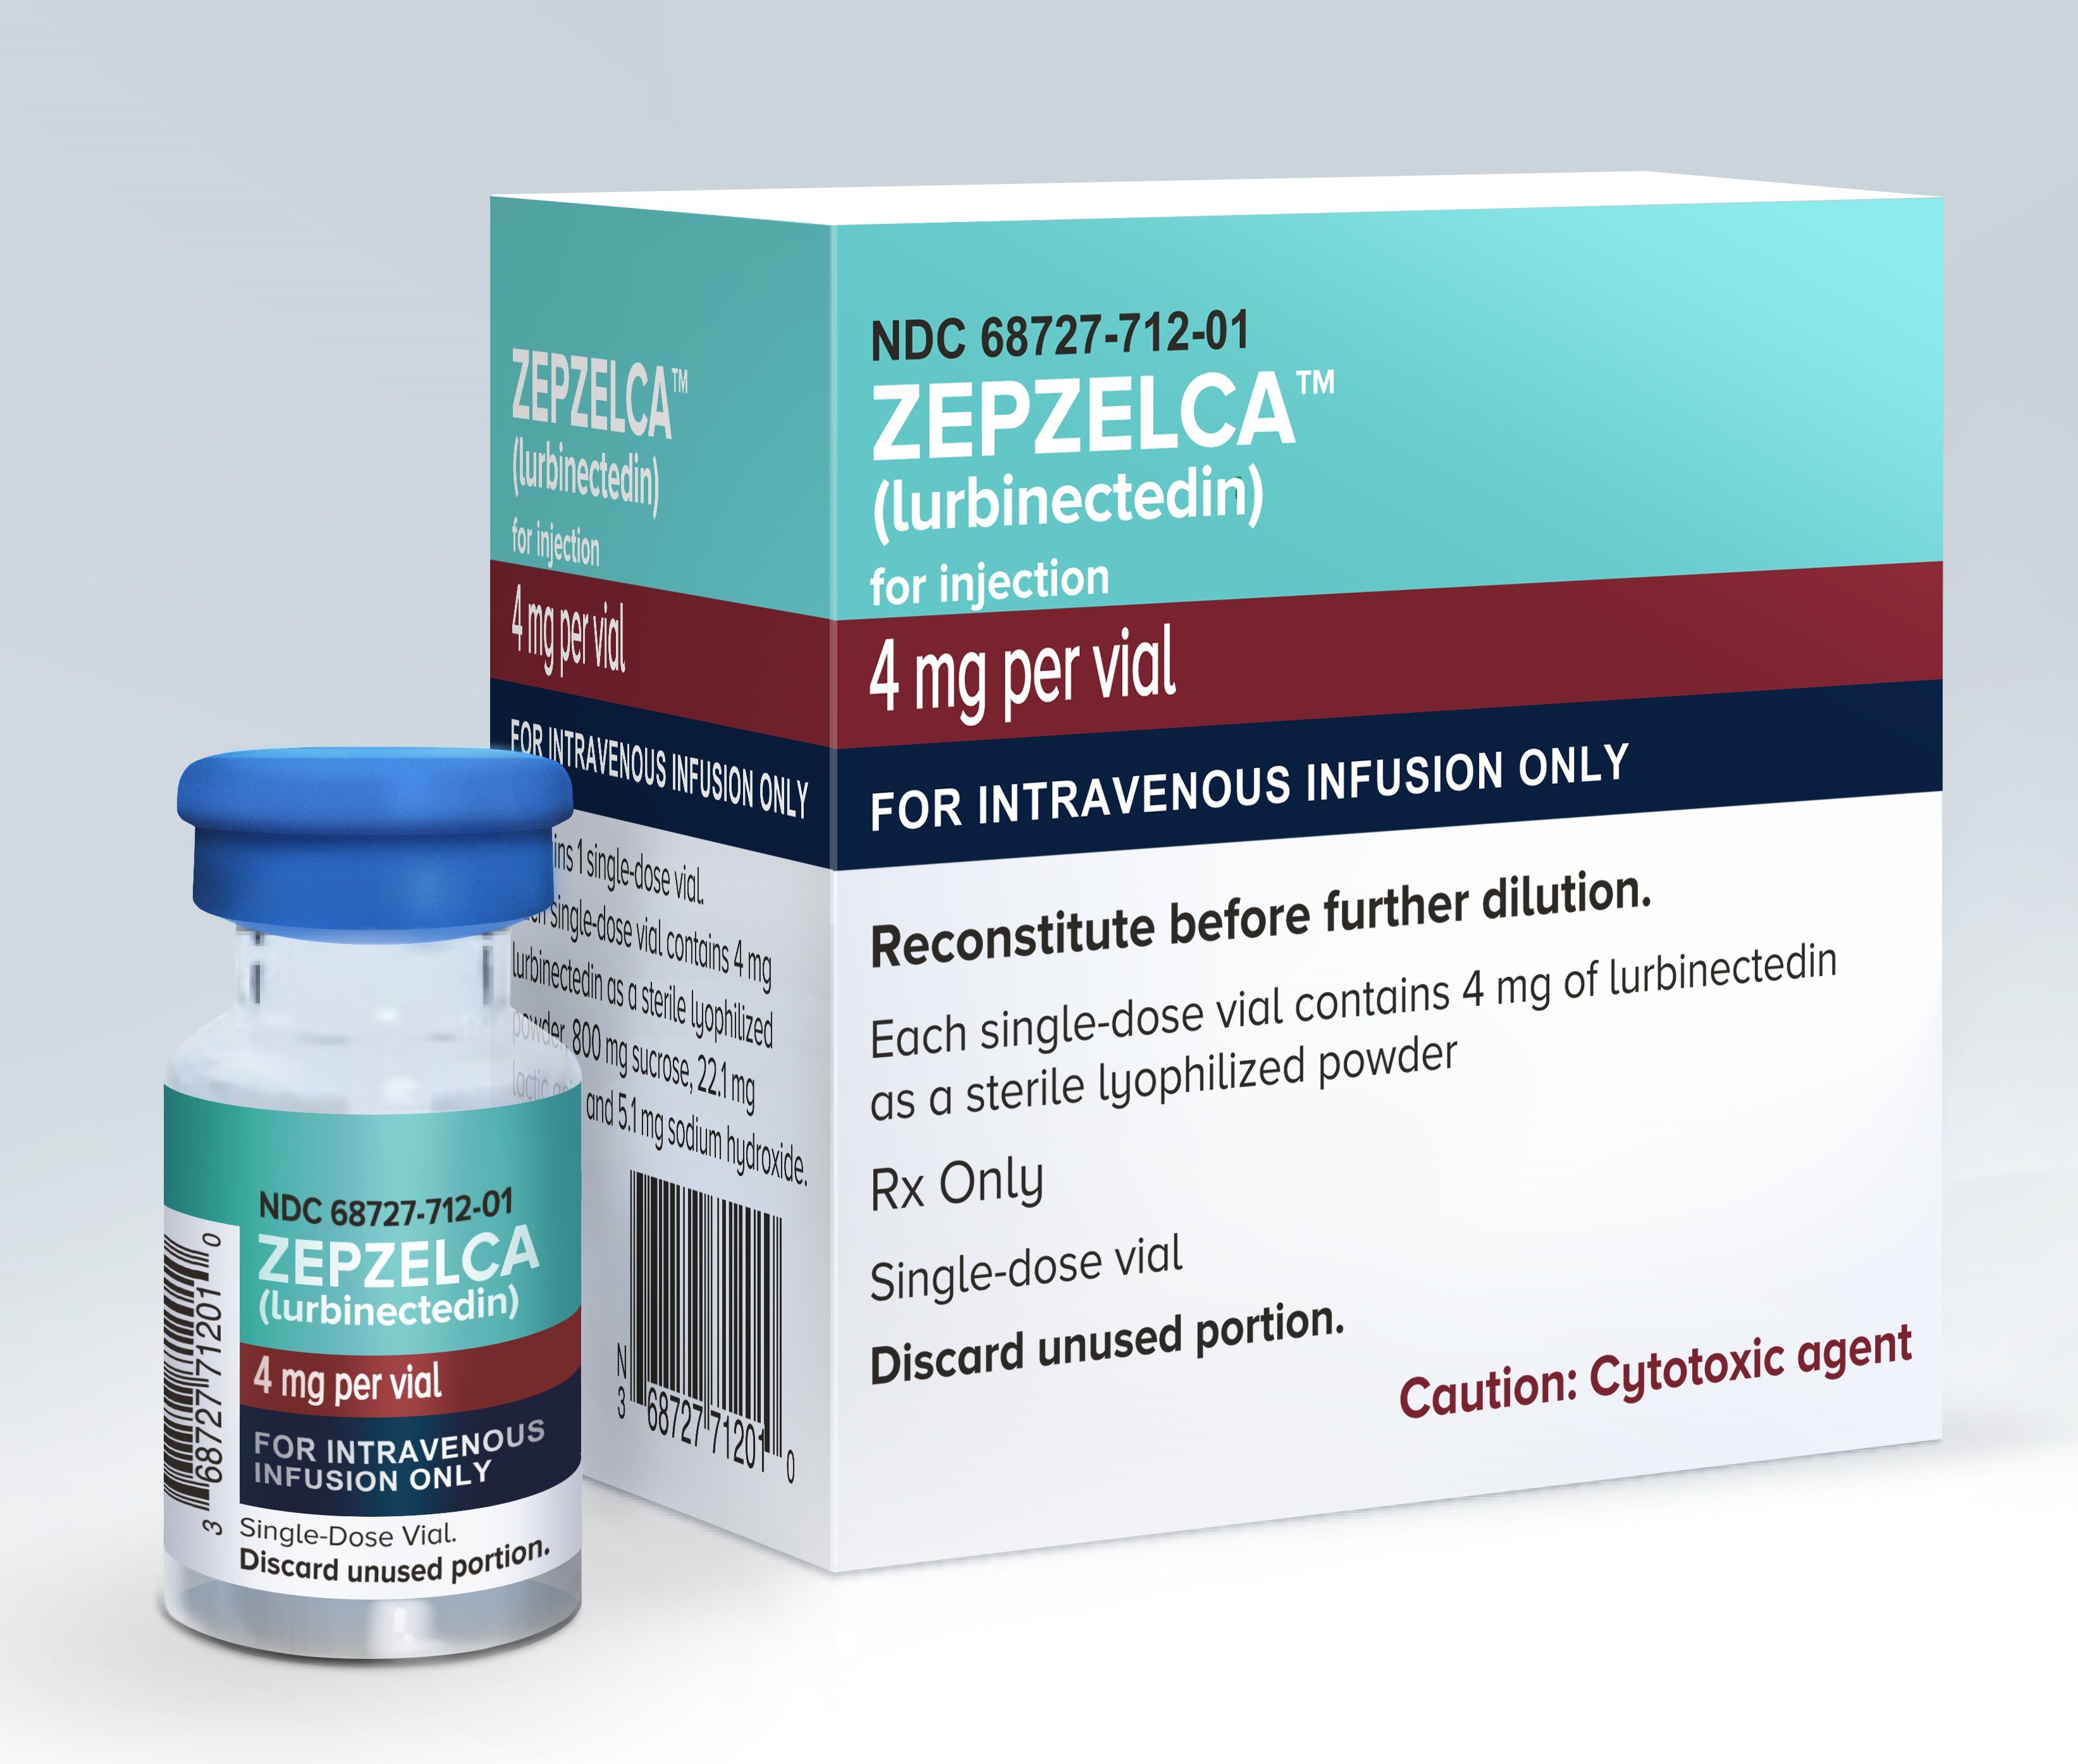 Jazz and PharmaMar Zepzelca for small cell lung cancer